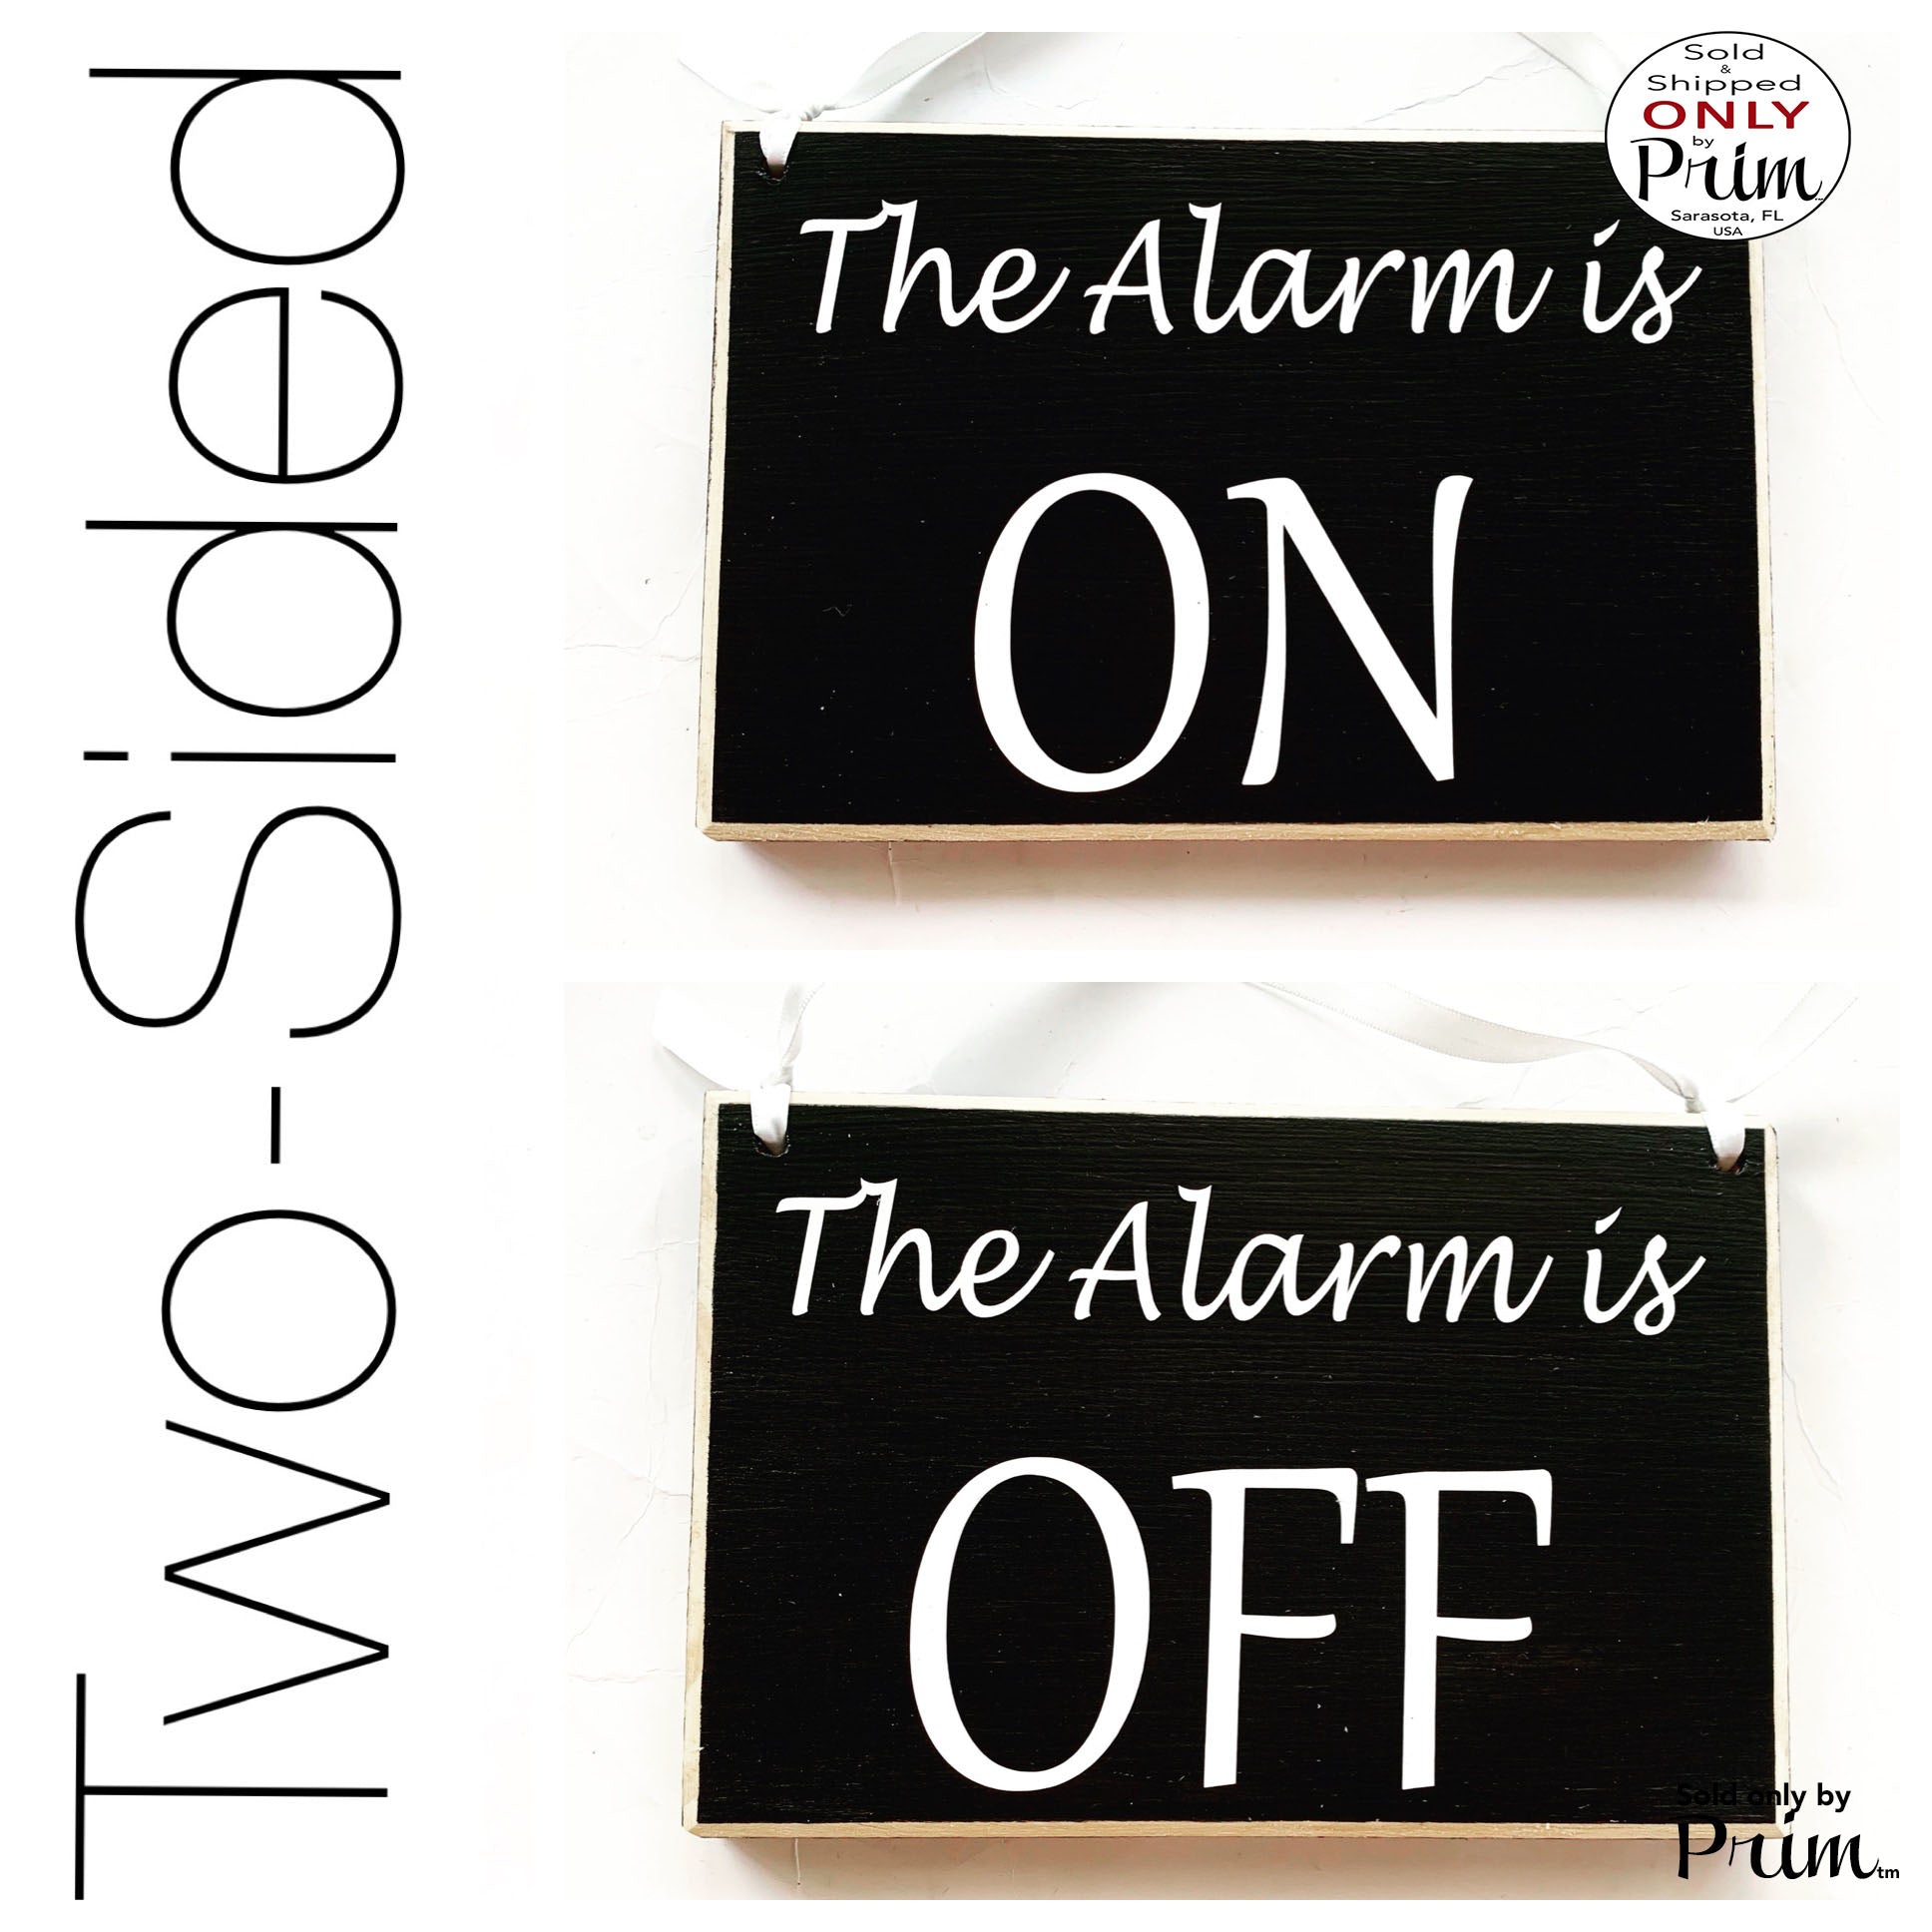 8x6 The Alarm is On Off Custom Wood Sign | Business Office Spa Salon Medical Home Security System Lock Unlock Door Wall Hanger Plaque